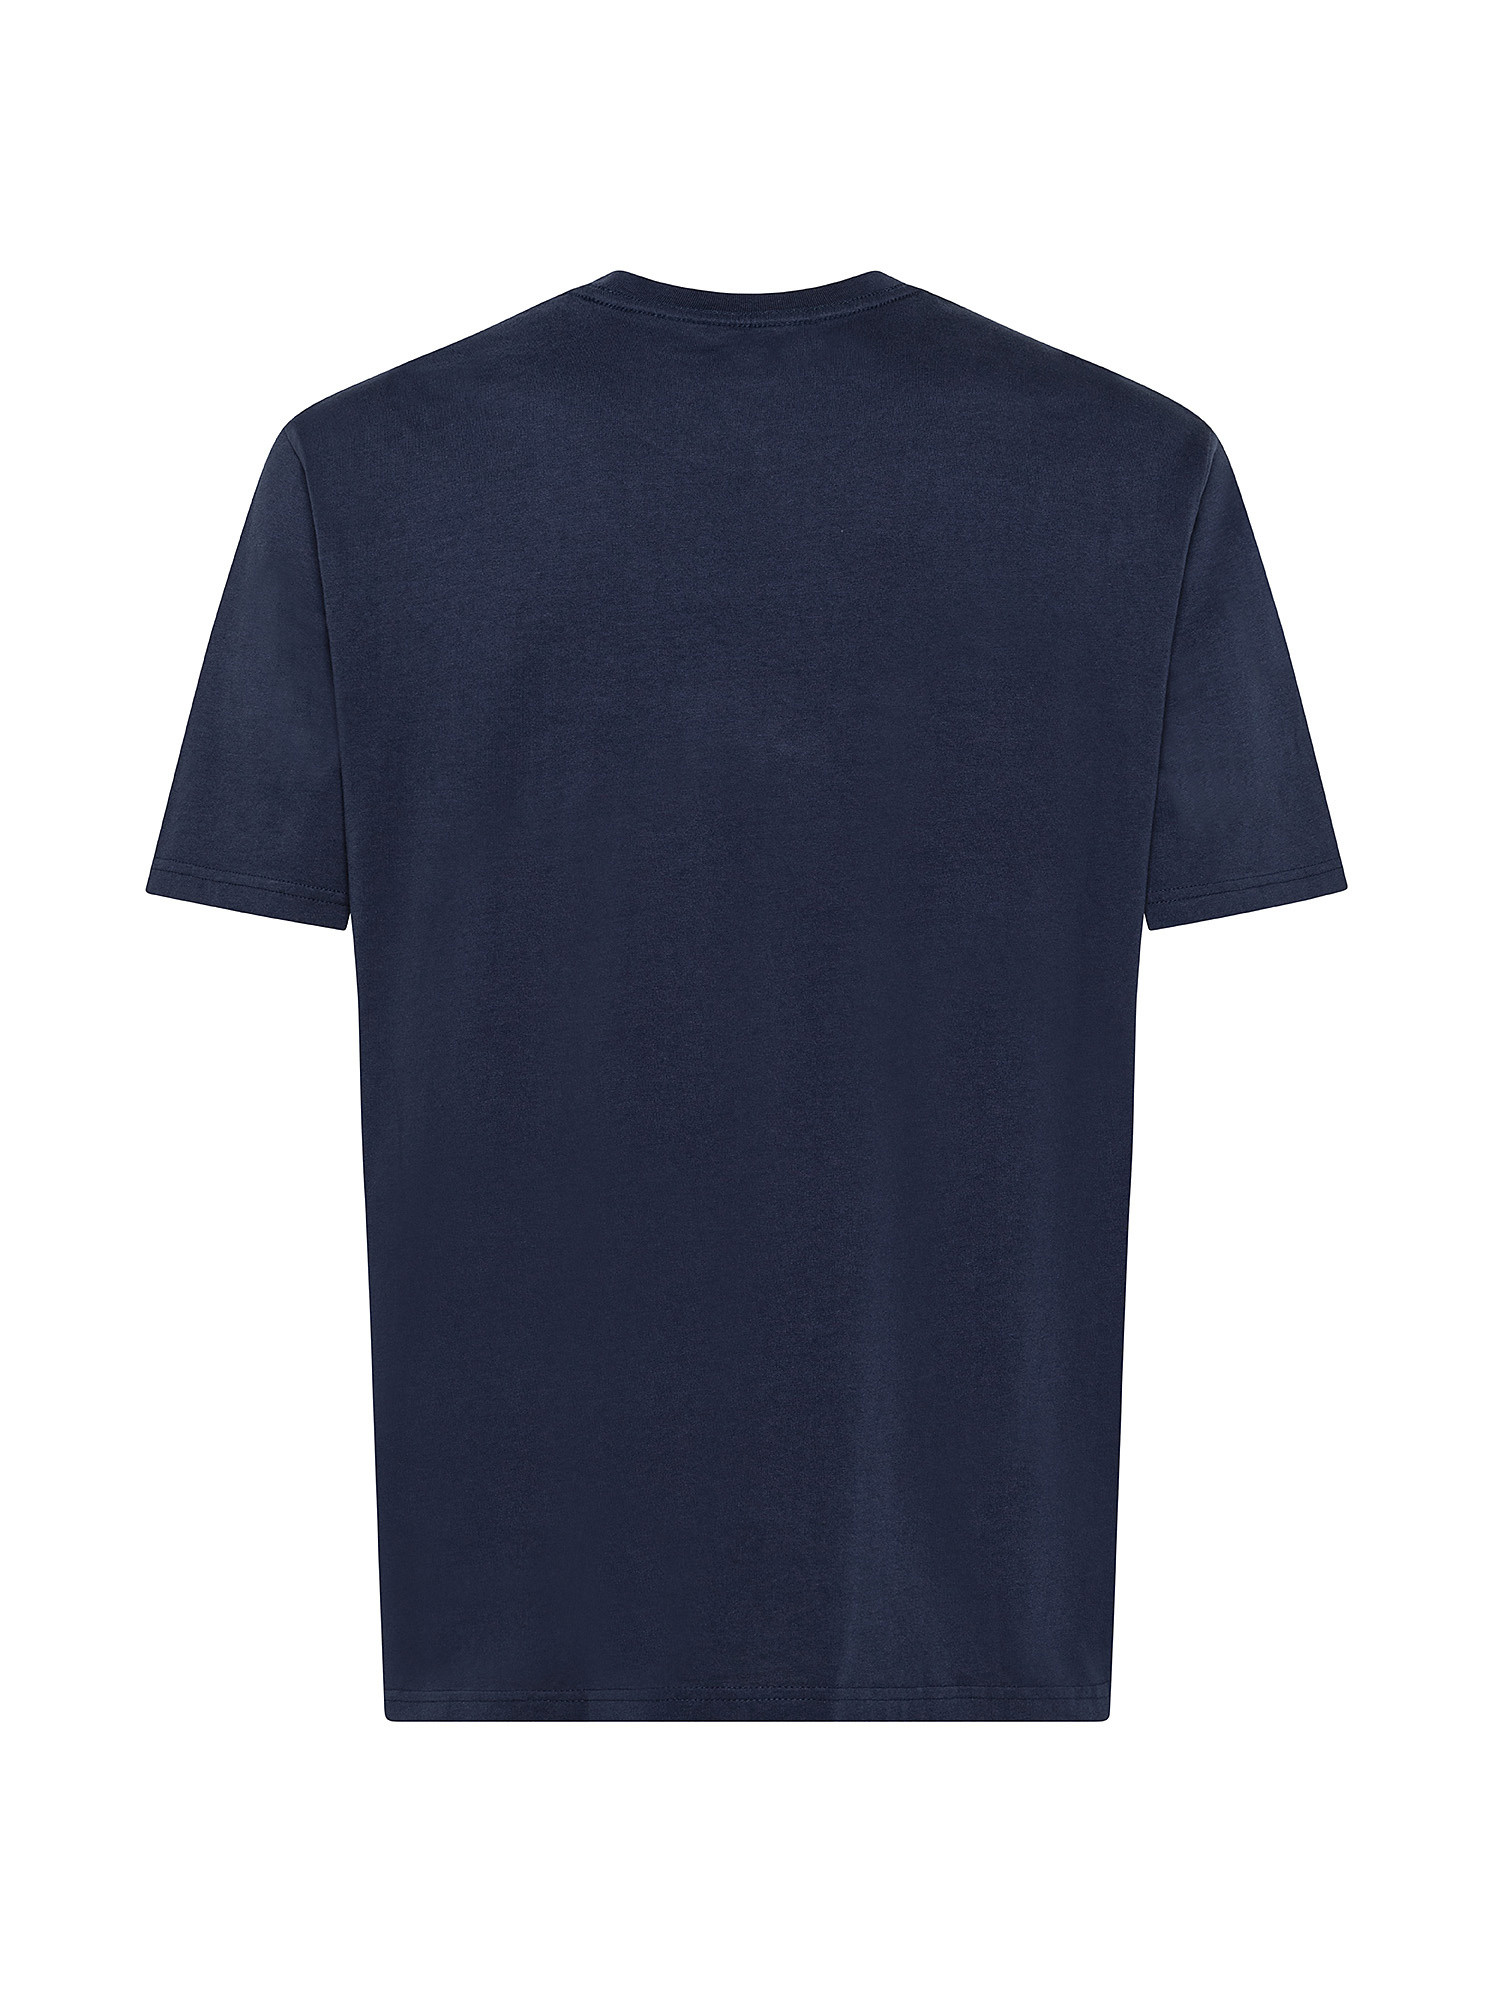 T-shirt with print, Blue, large image number 1